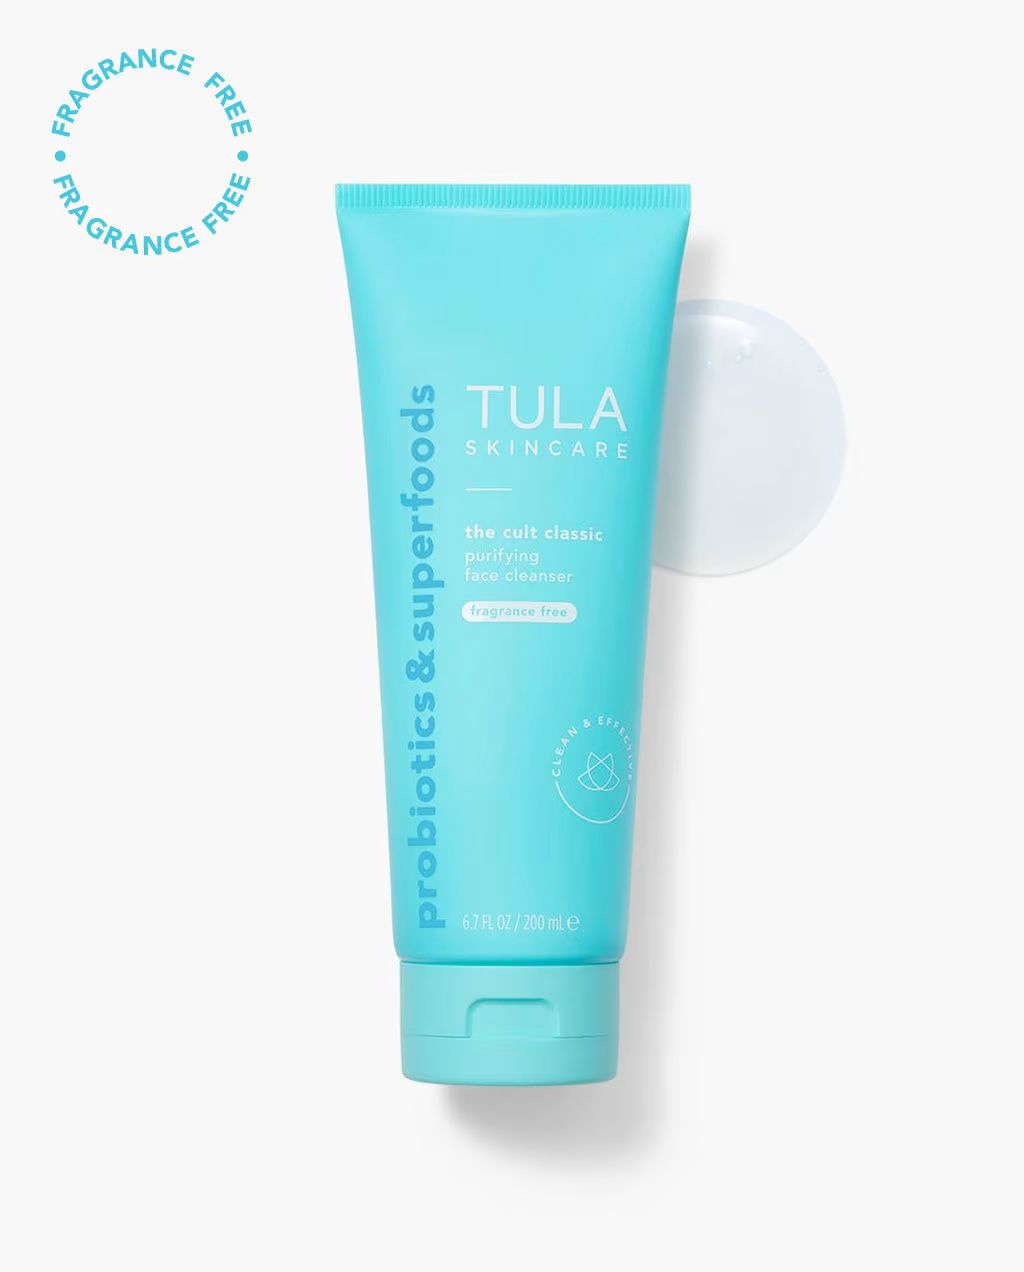 purifying face cleanser - fragrance free | Tula Skincare